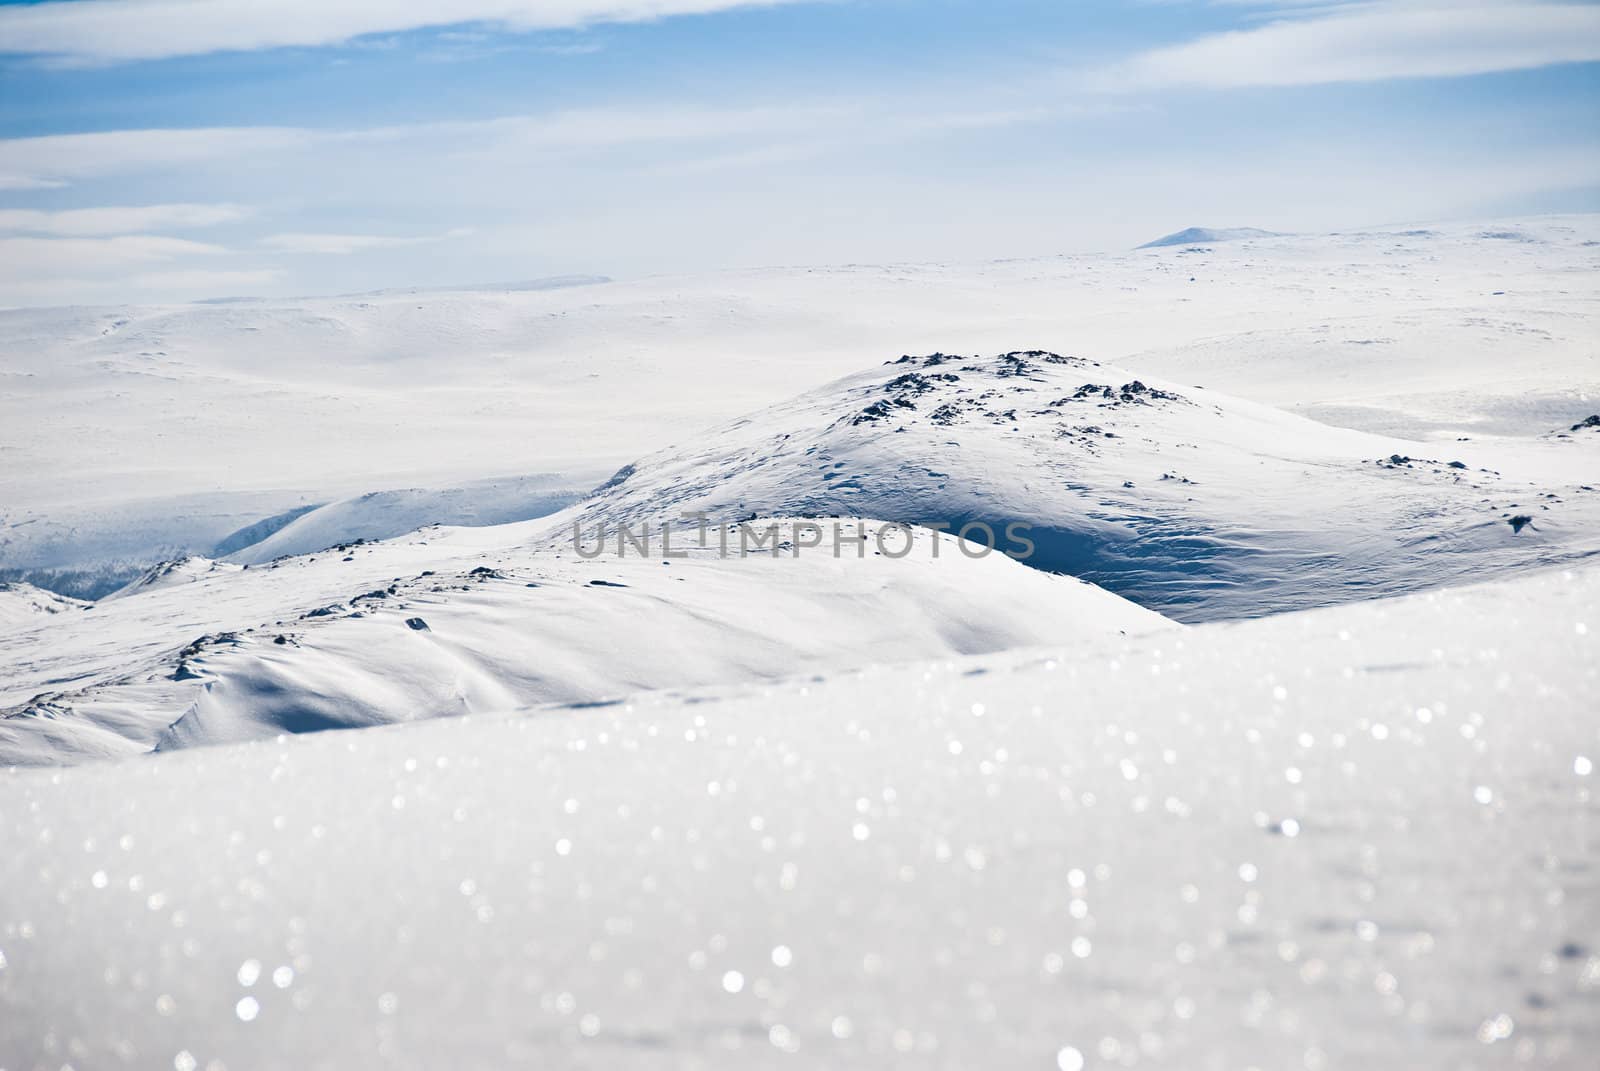 The top of a snowy mountain.